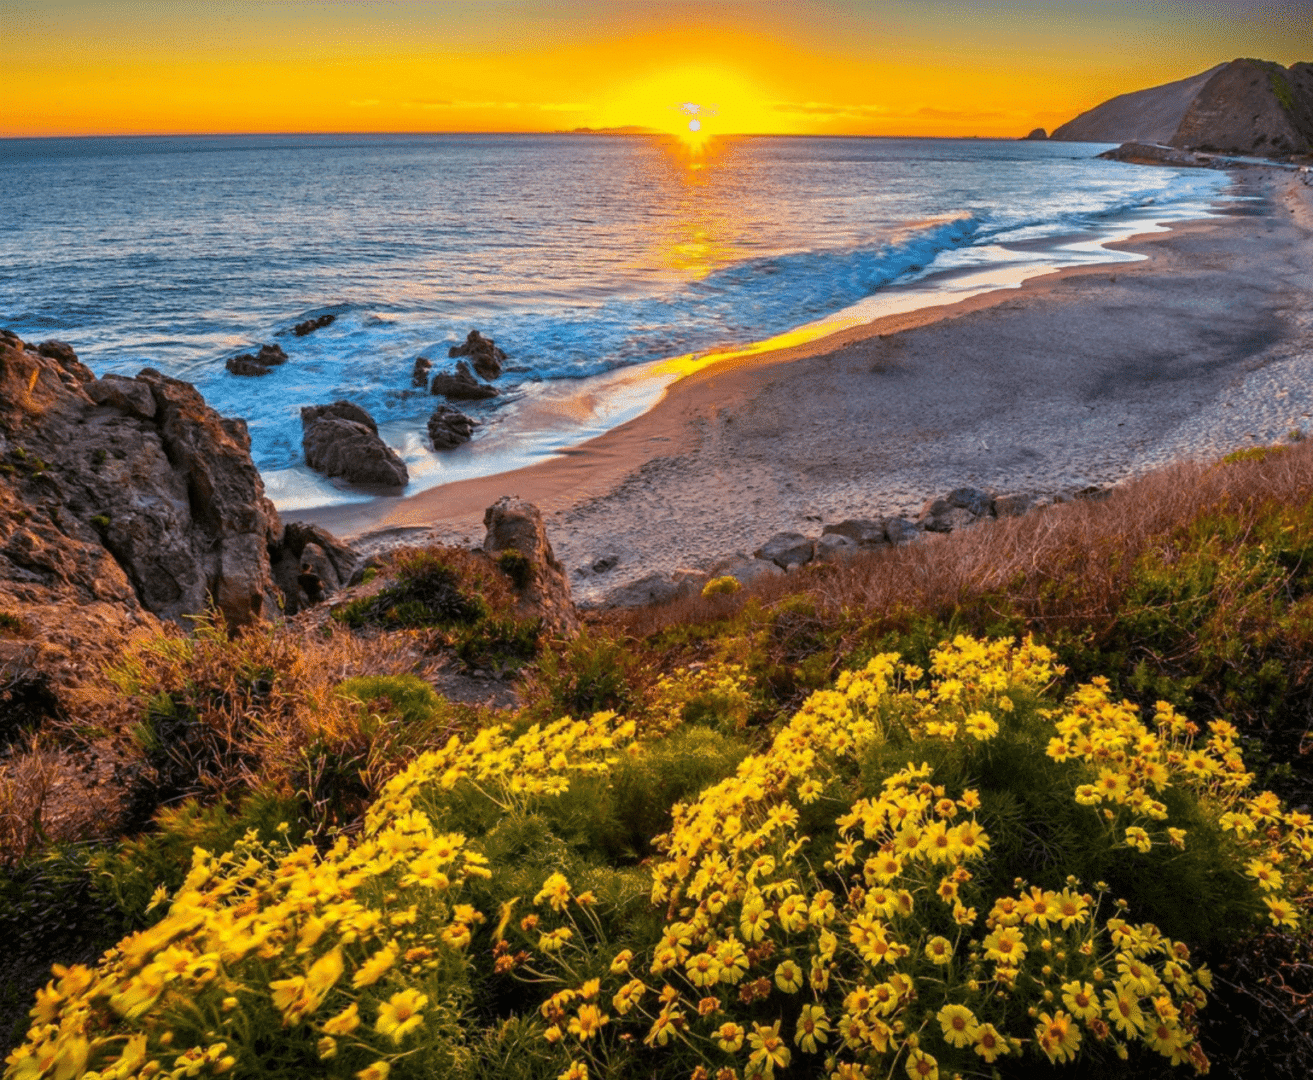 Best places to take pictures in Ventura County, Sycamore Cove State Beach.